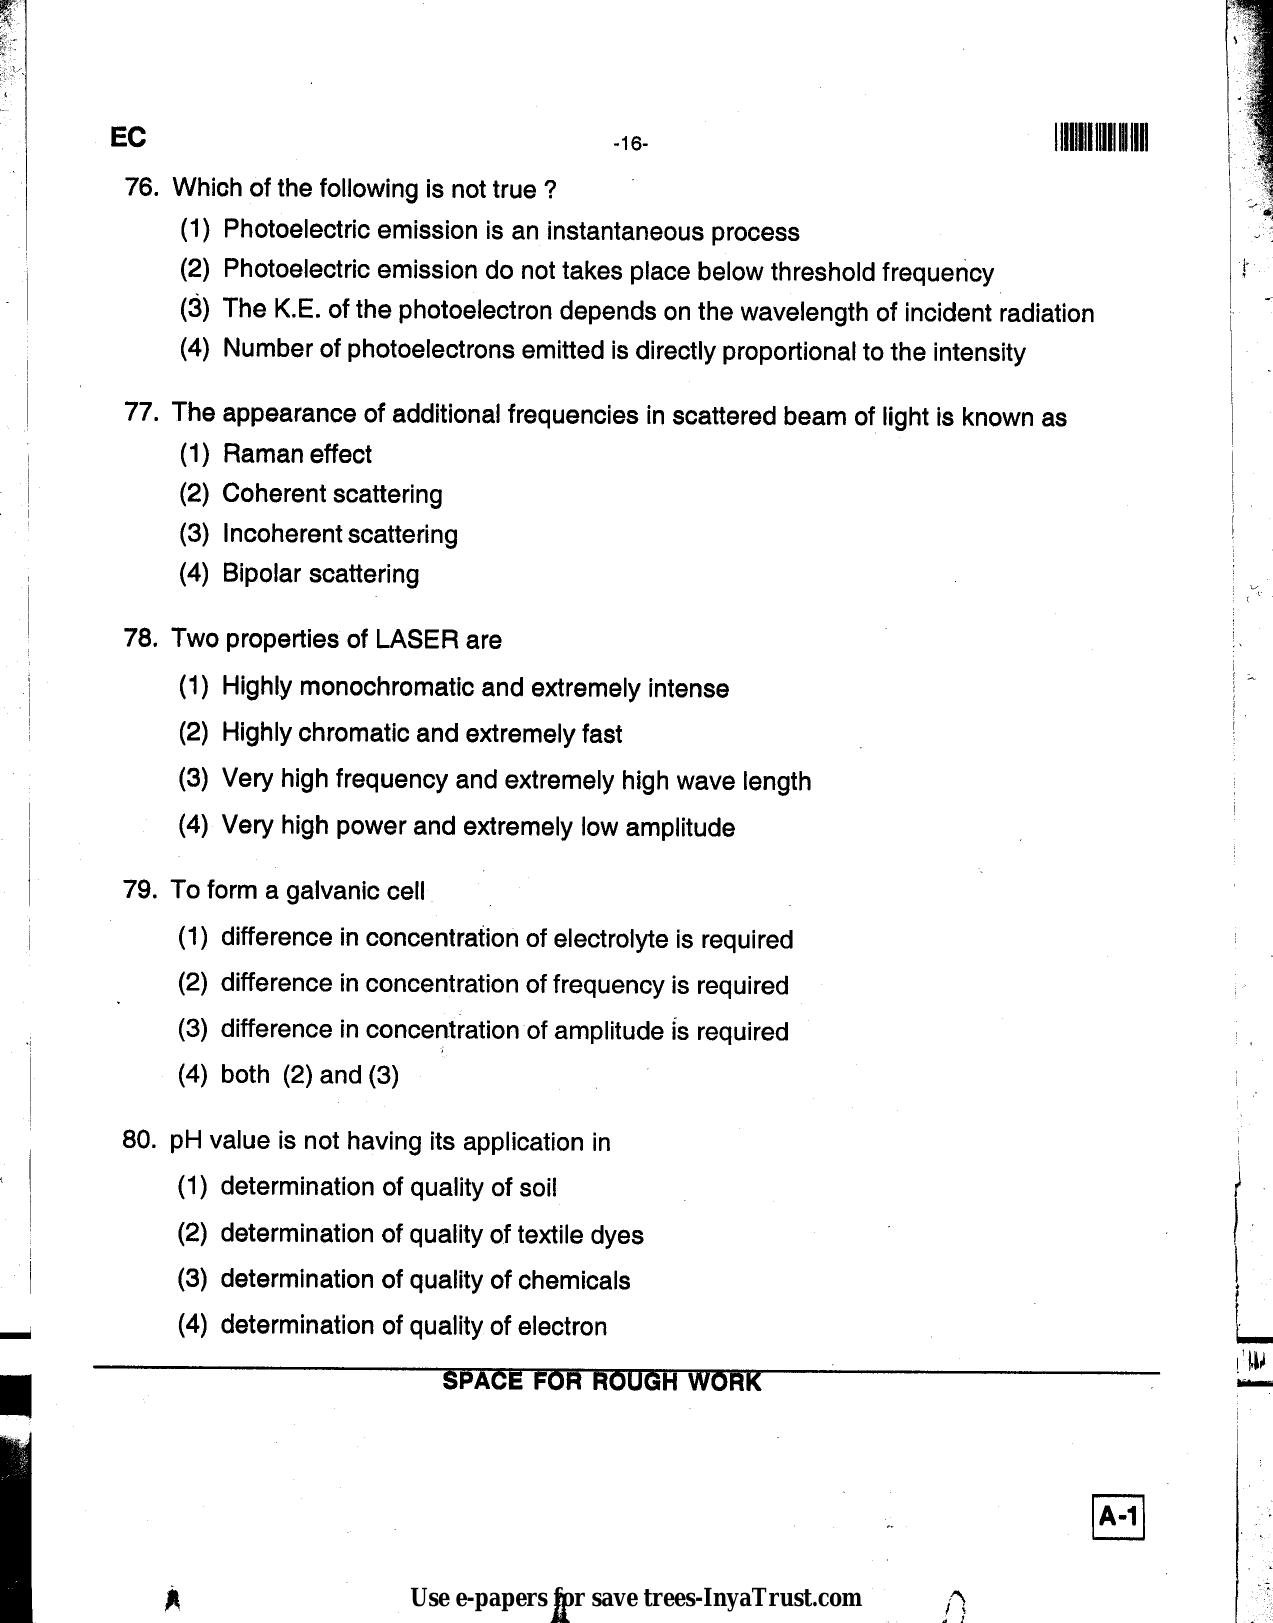 Karnataka Diploma CET- 2013 Electronics and Communication Engineering Question Paper - Page 16